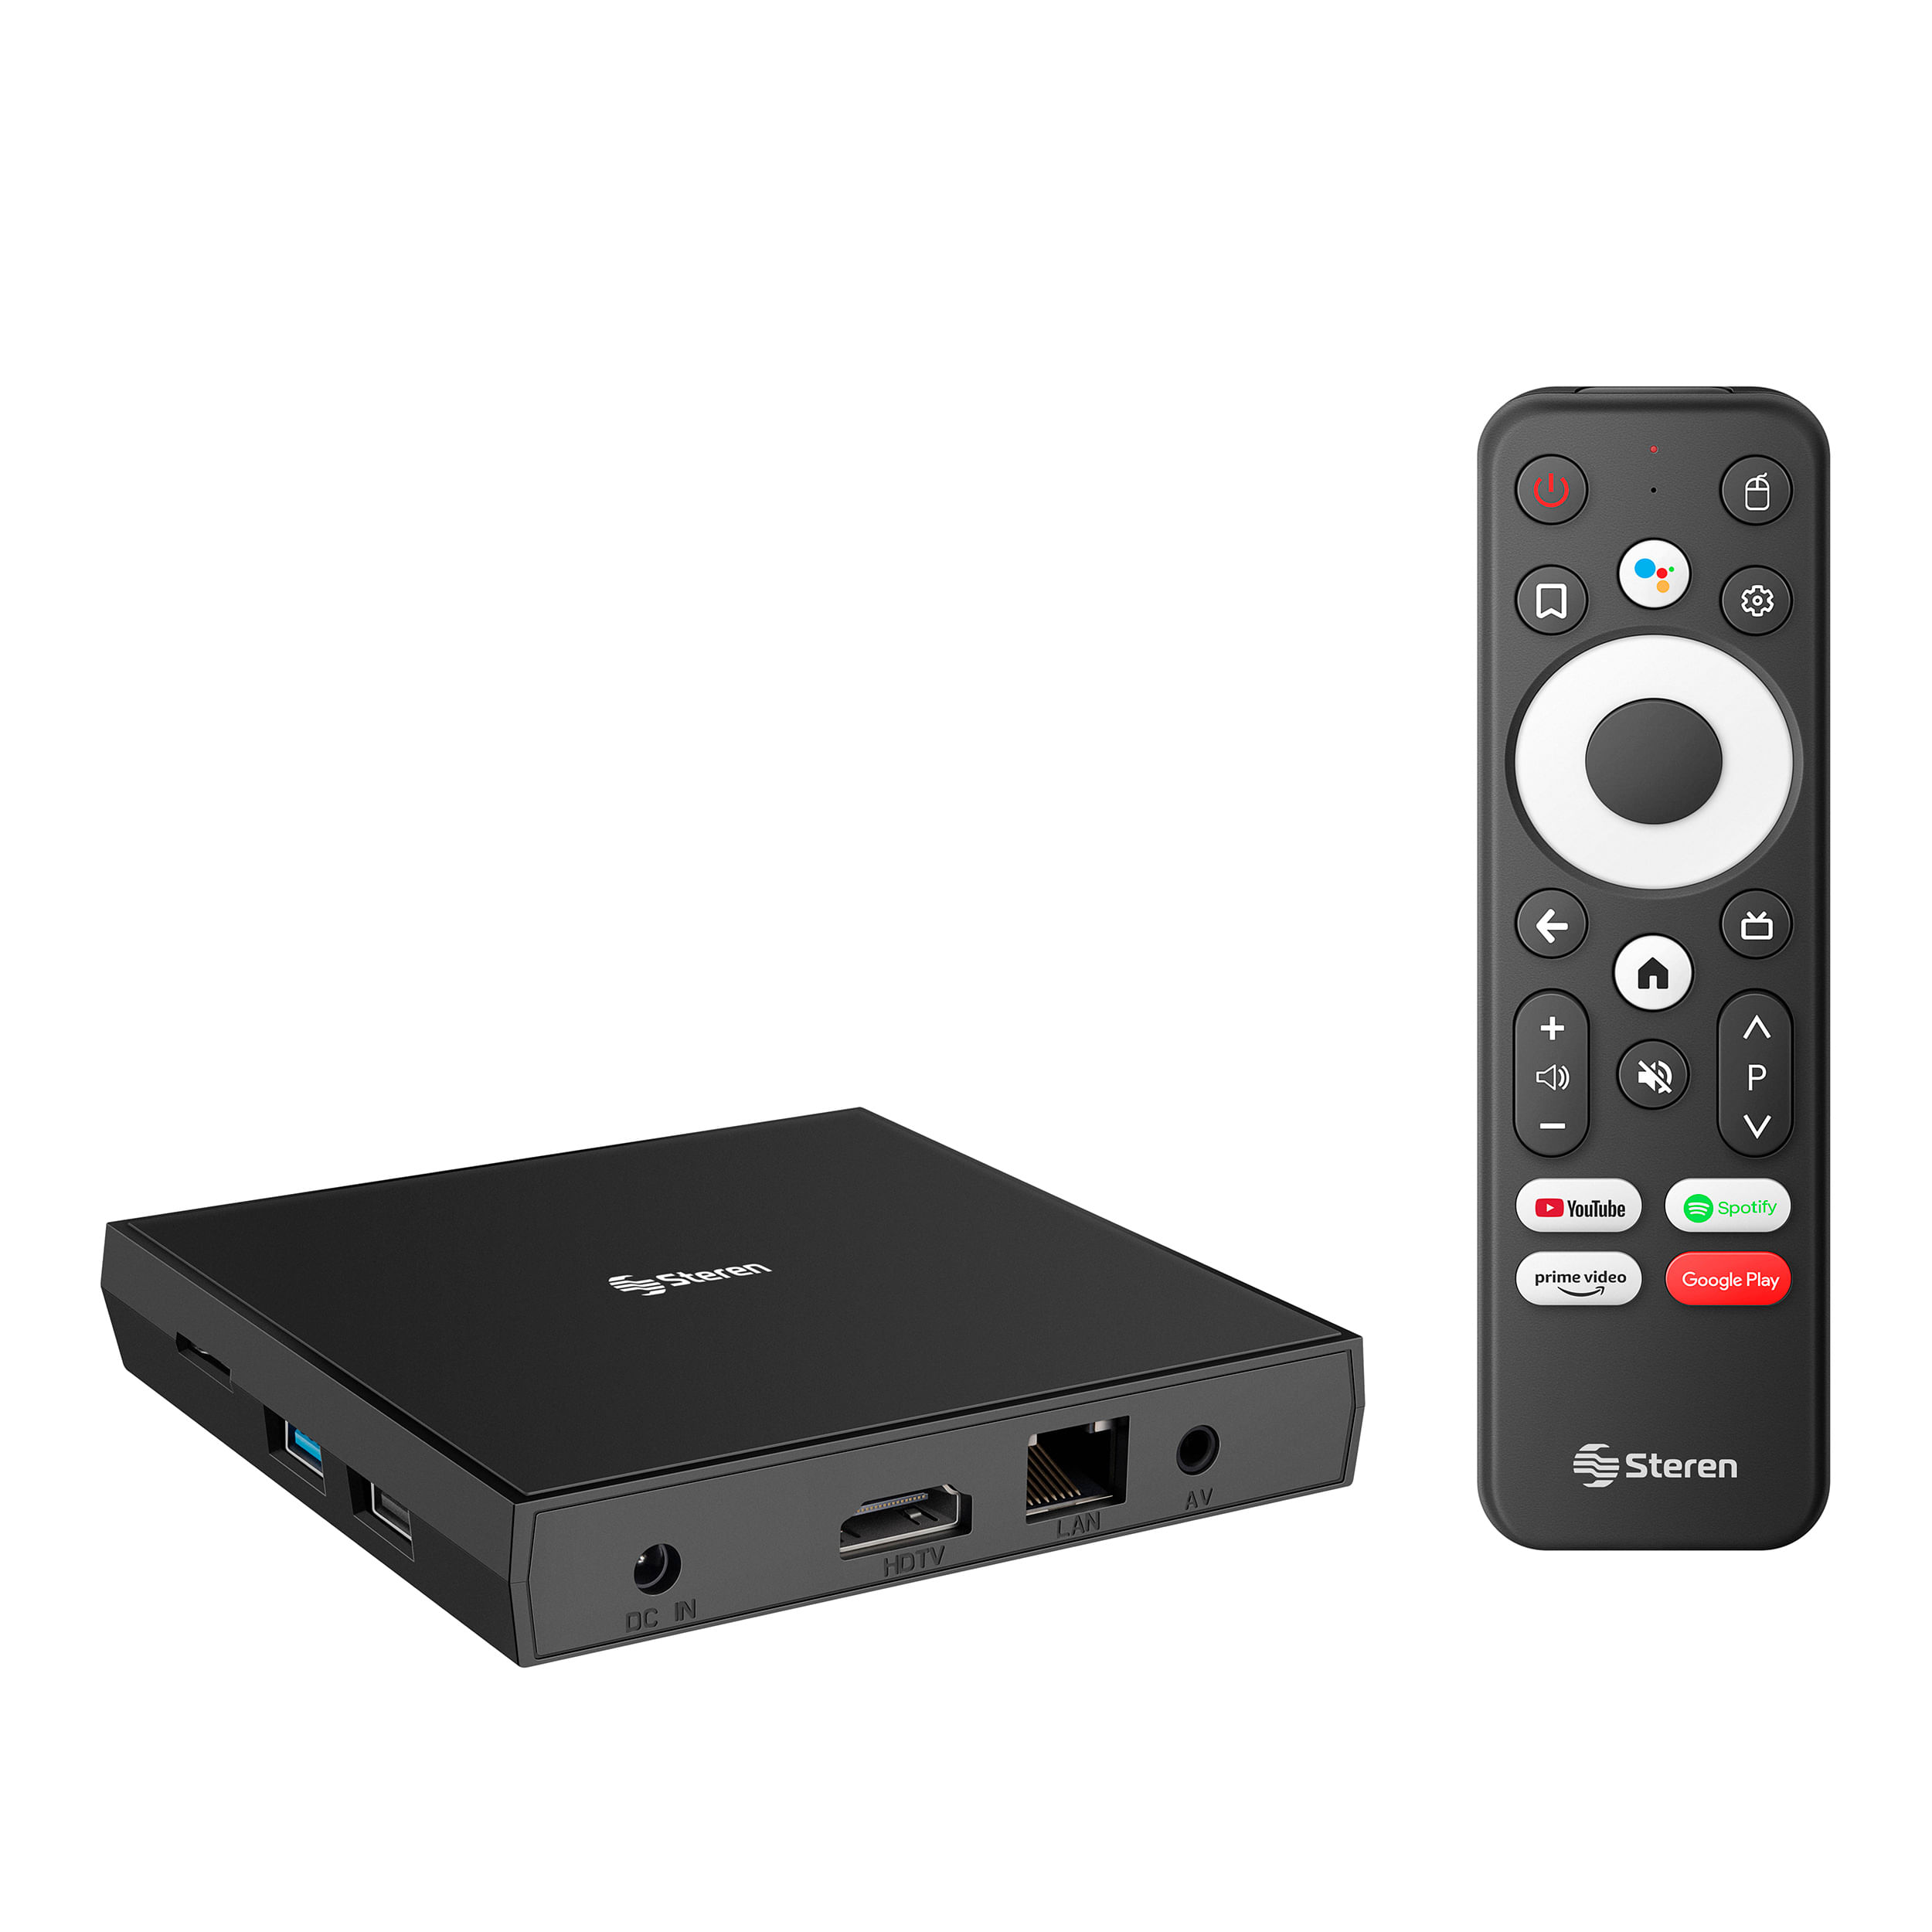 Wholesale Iptv Box Allows Cable, TV, Or Streaming - family-gadgets.ru